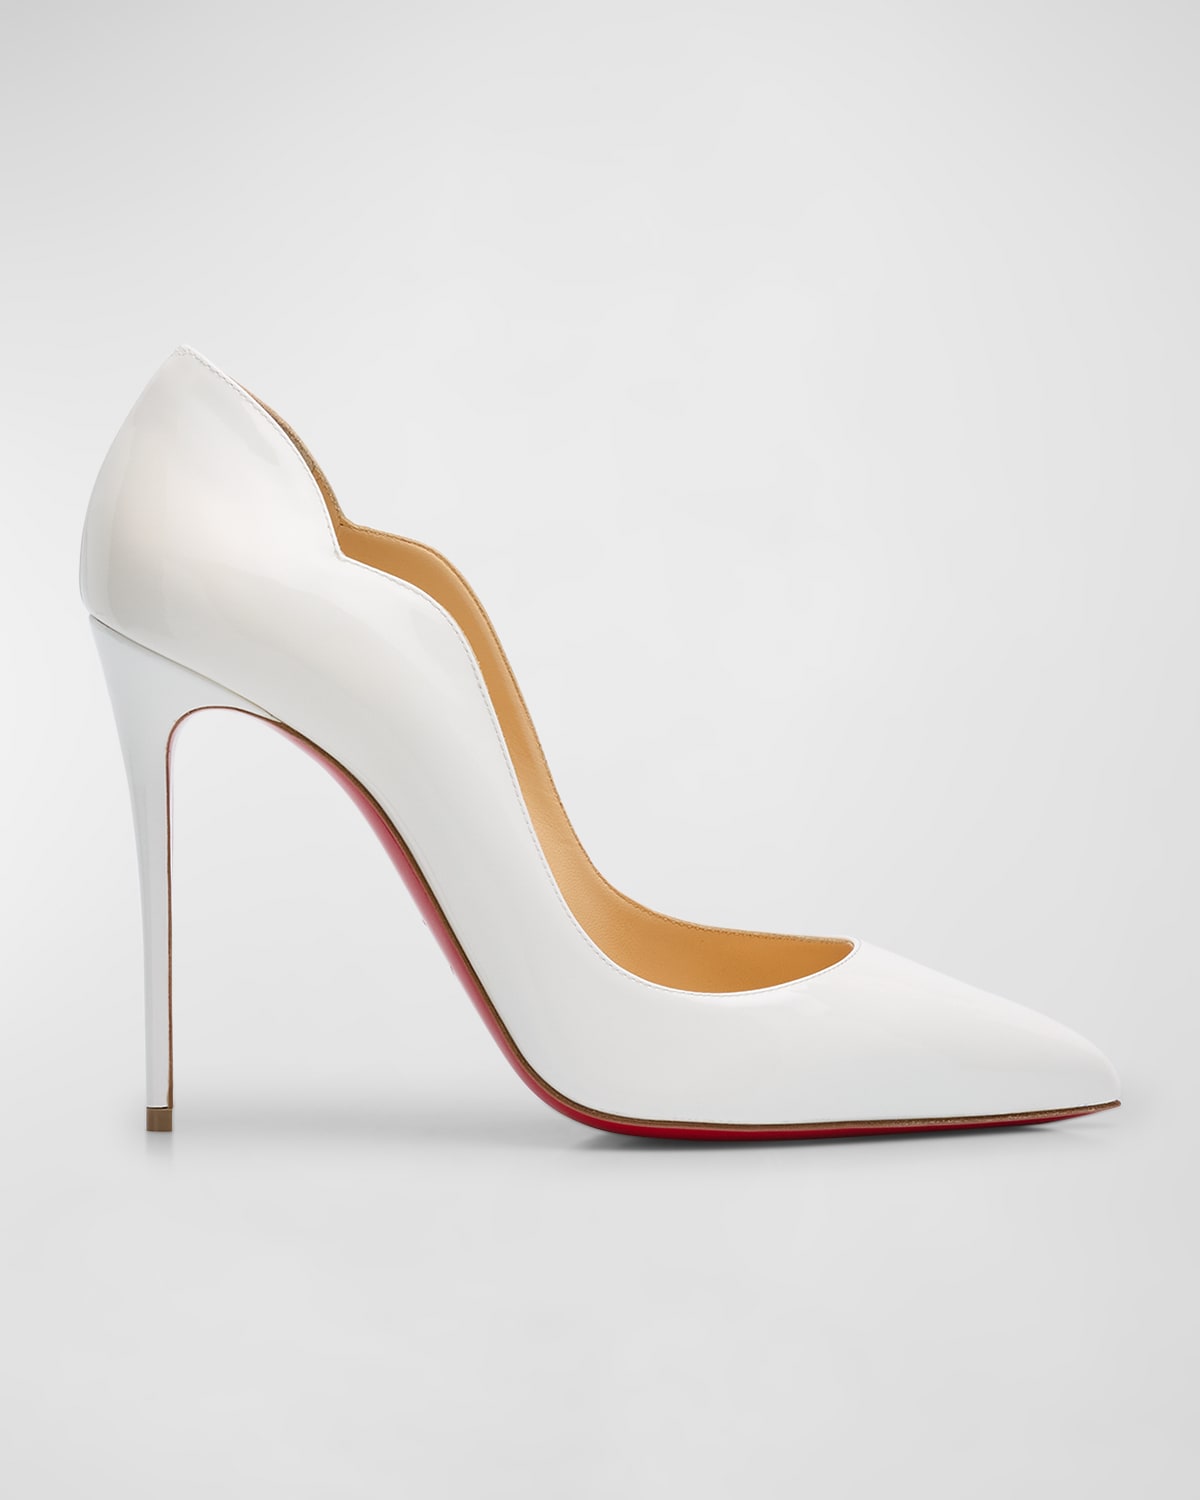 Hot Chick 100 Patent Red Sole High-Heel Pumps